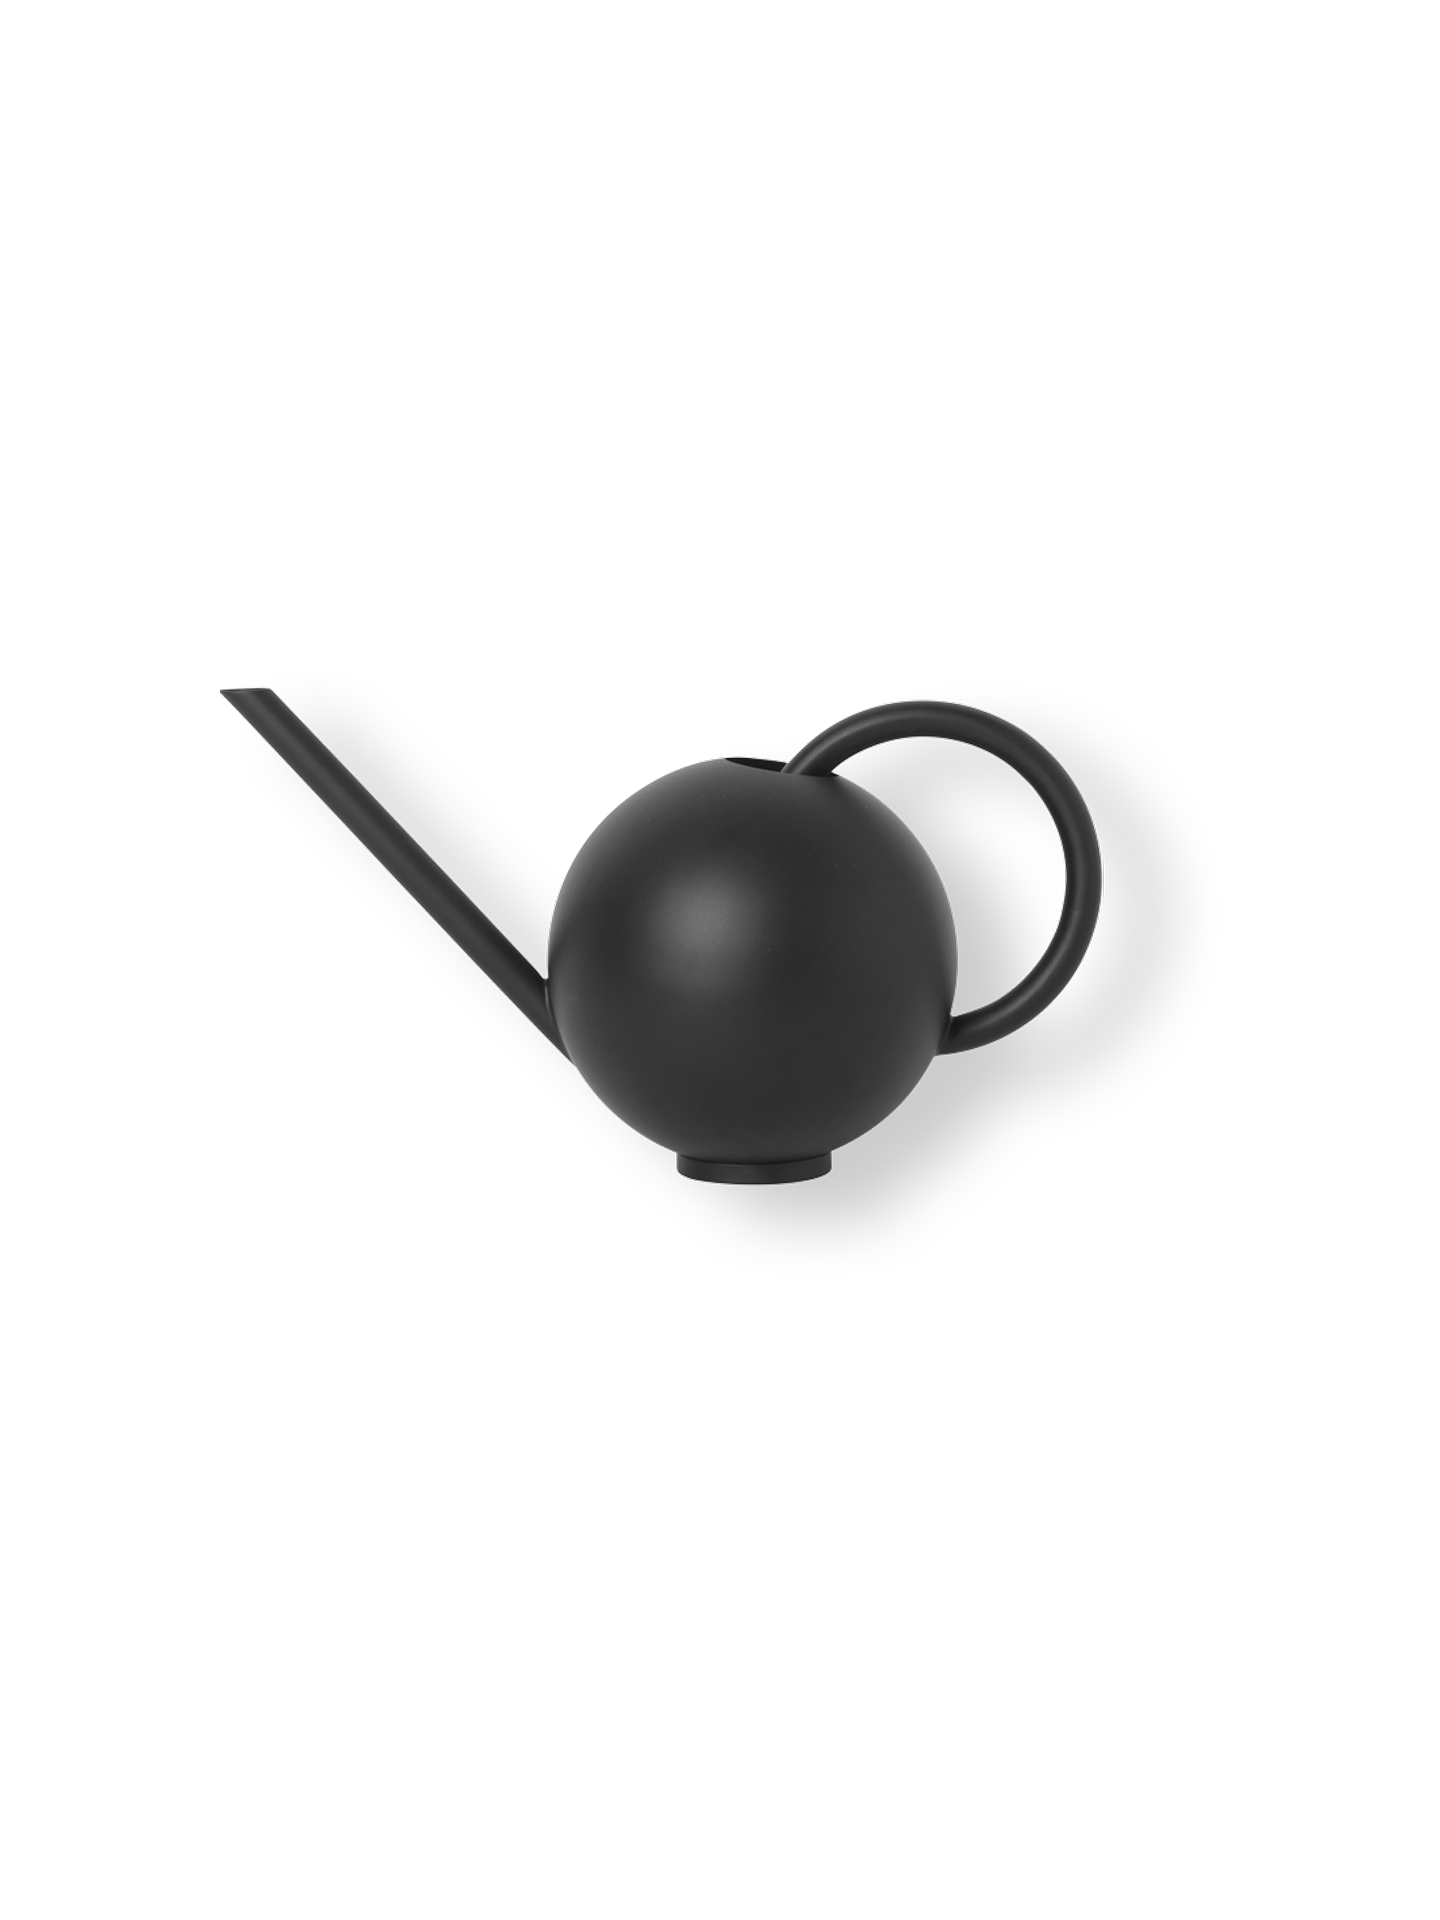 Orb Watering Can ver. Farben